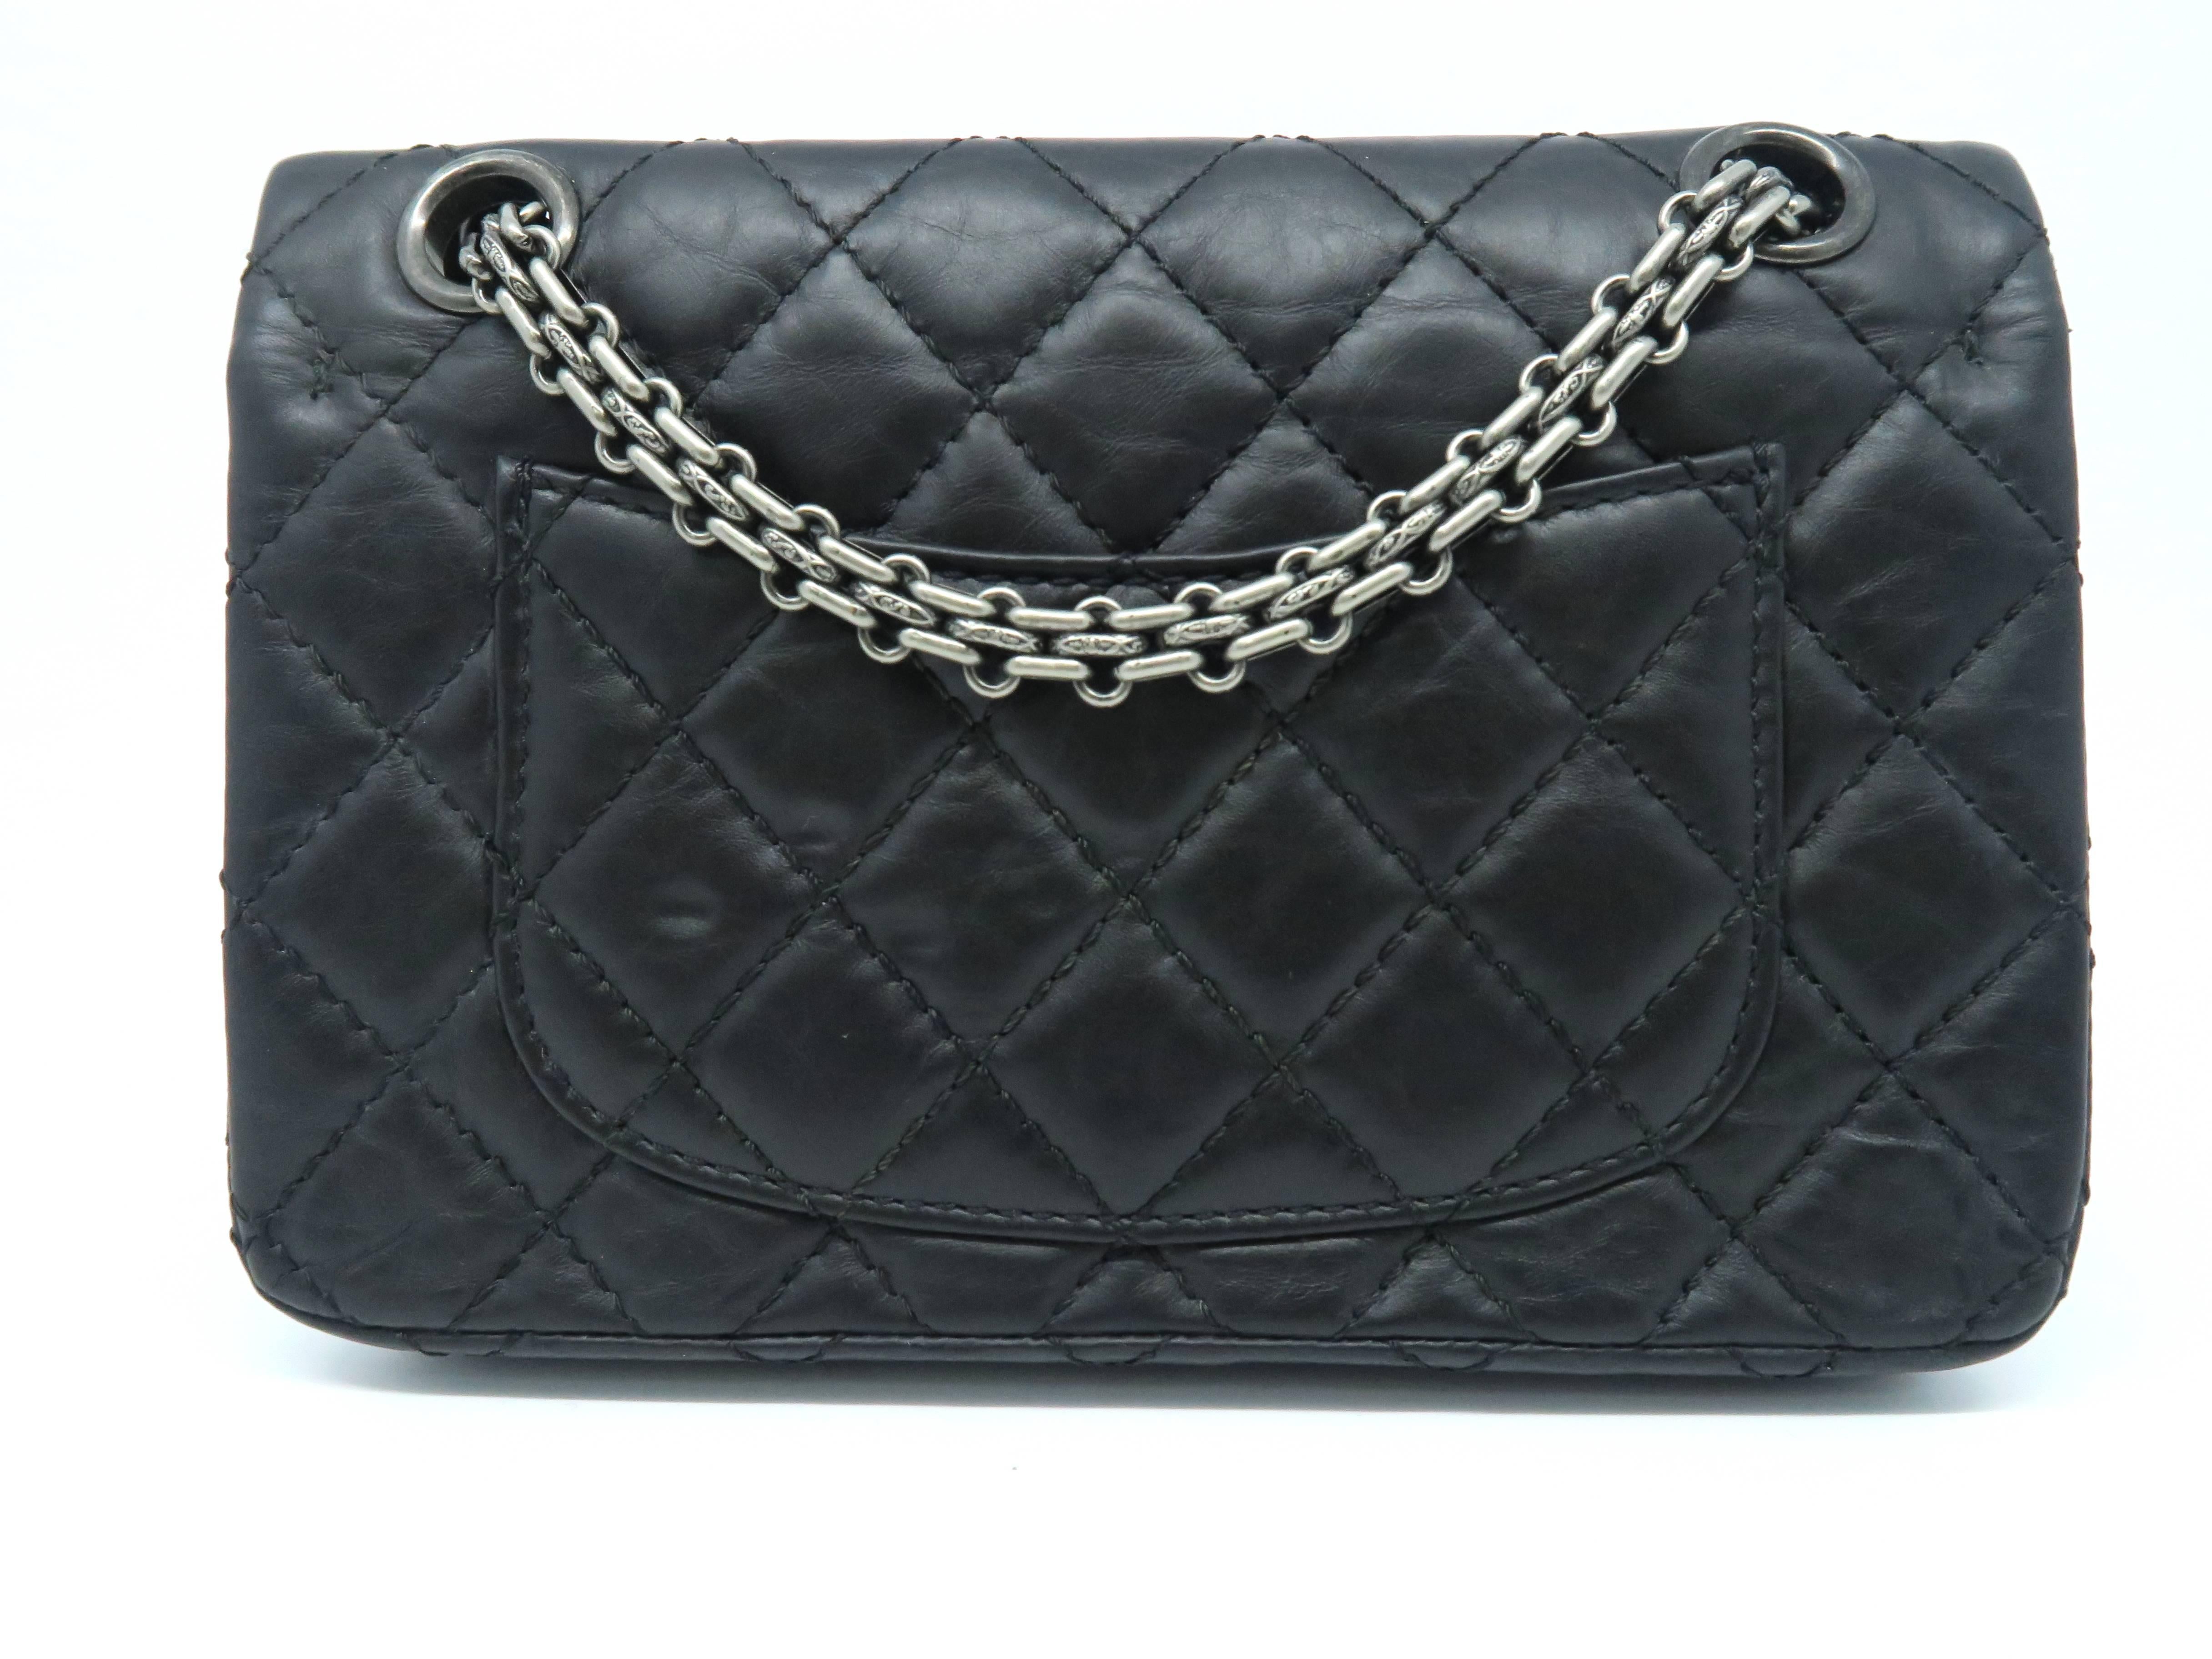 Chanel Black Quilting Calfskin Leather Silver Metal Flap Bag In Excellent Condition For Sale In Kowloon, HK